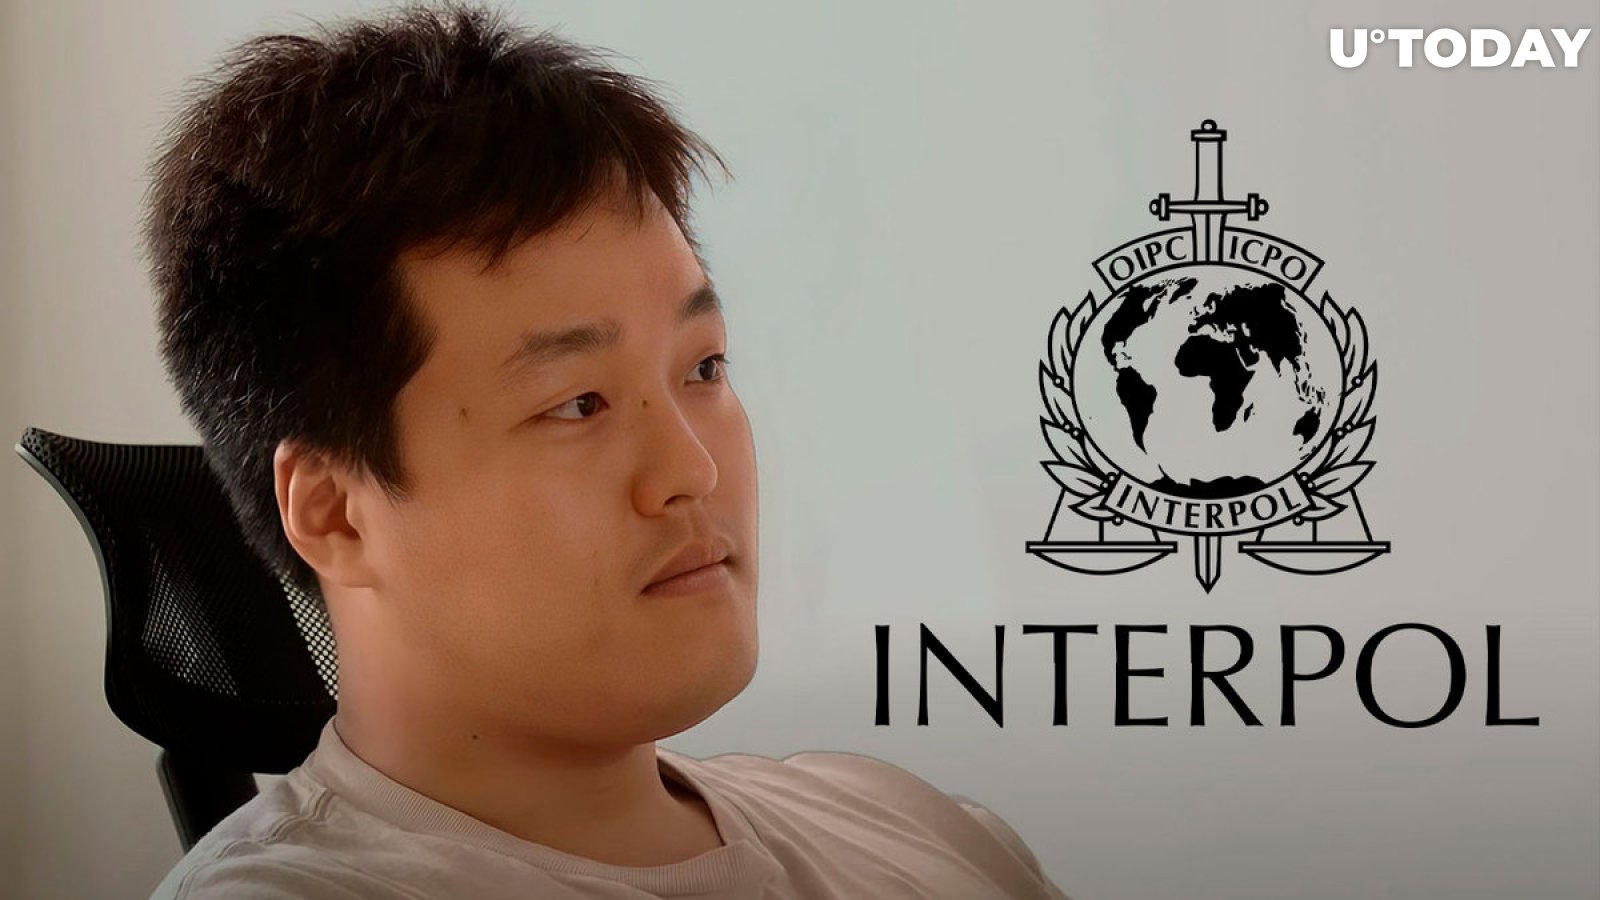 Interpol Might Issue Red Notice to Capture Do Kwon